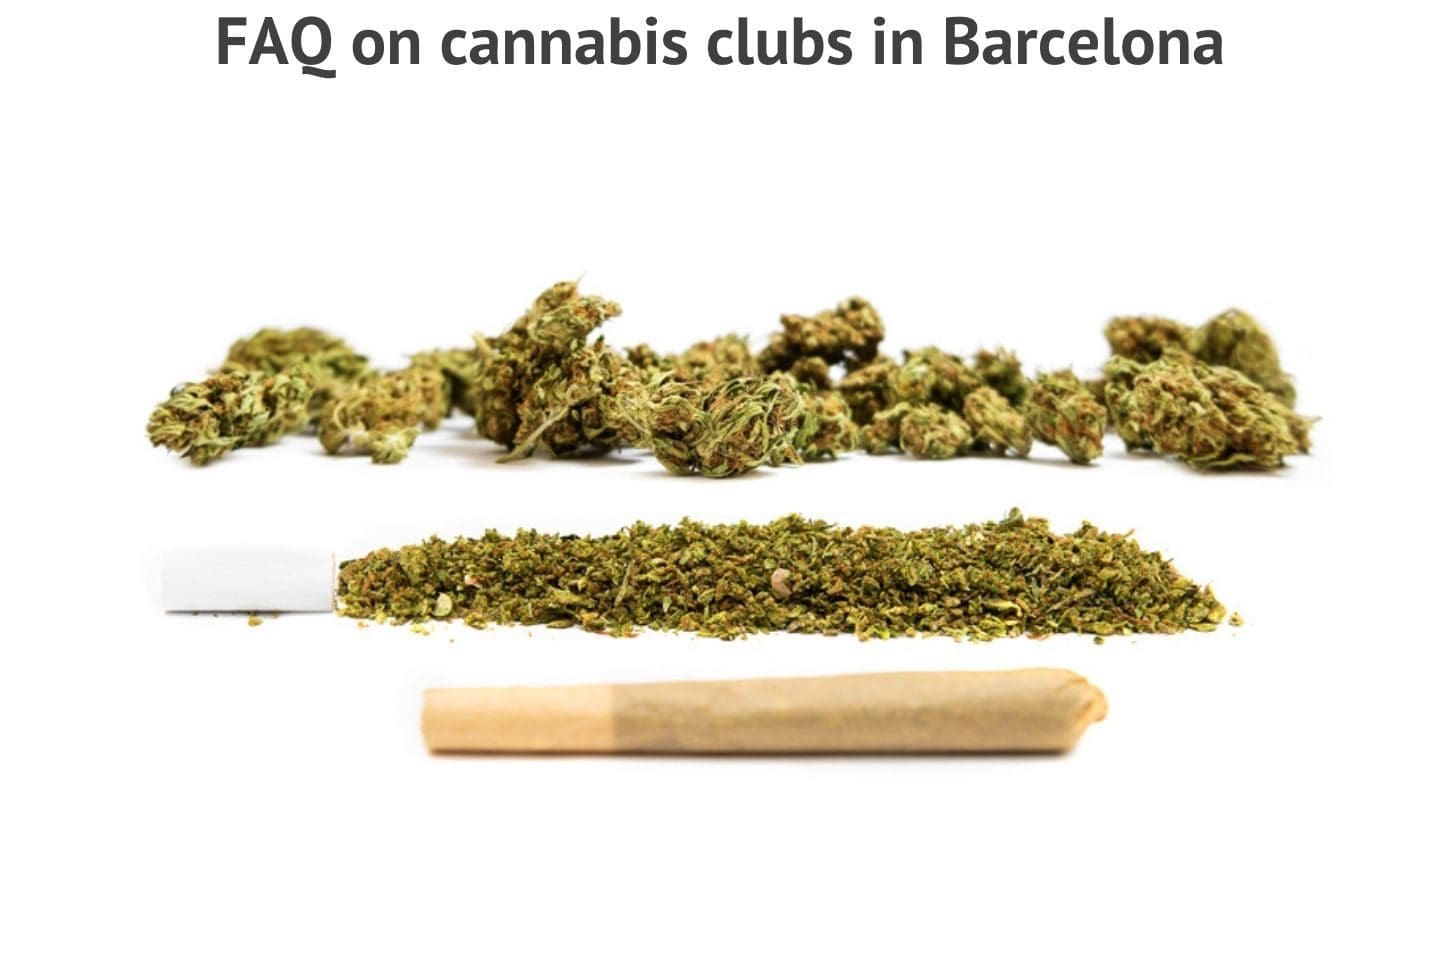 Guide to cannabis clubs in Barcelona